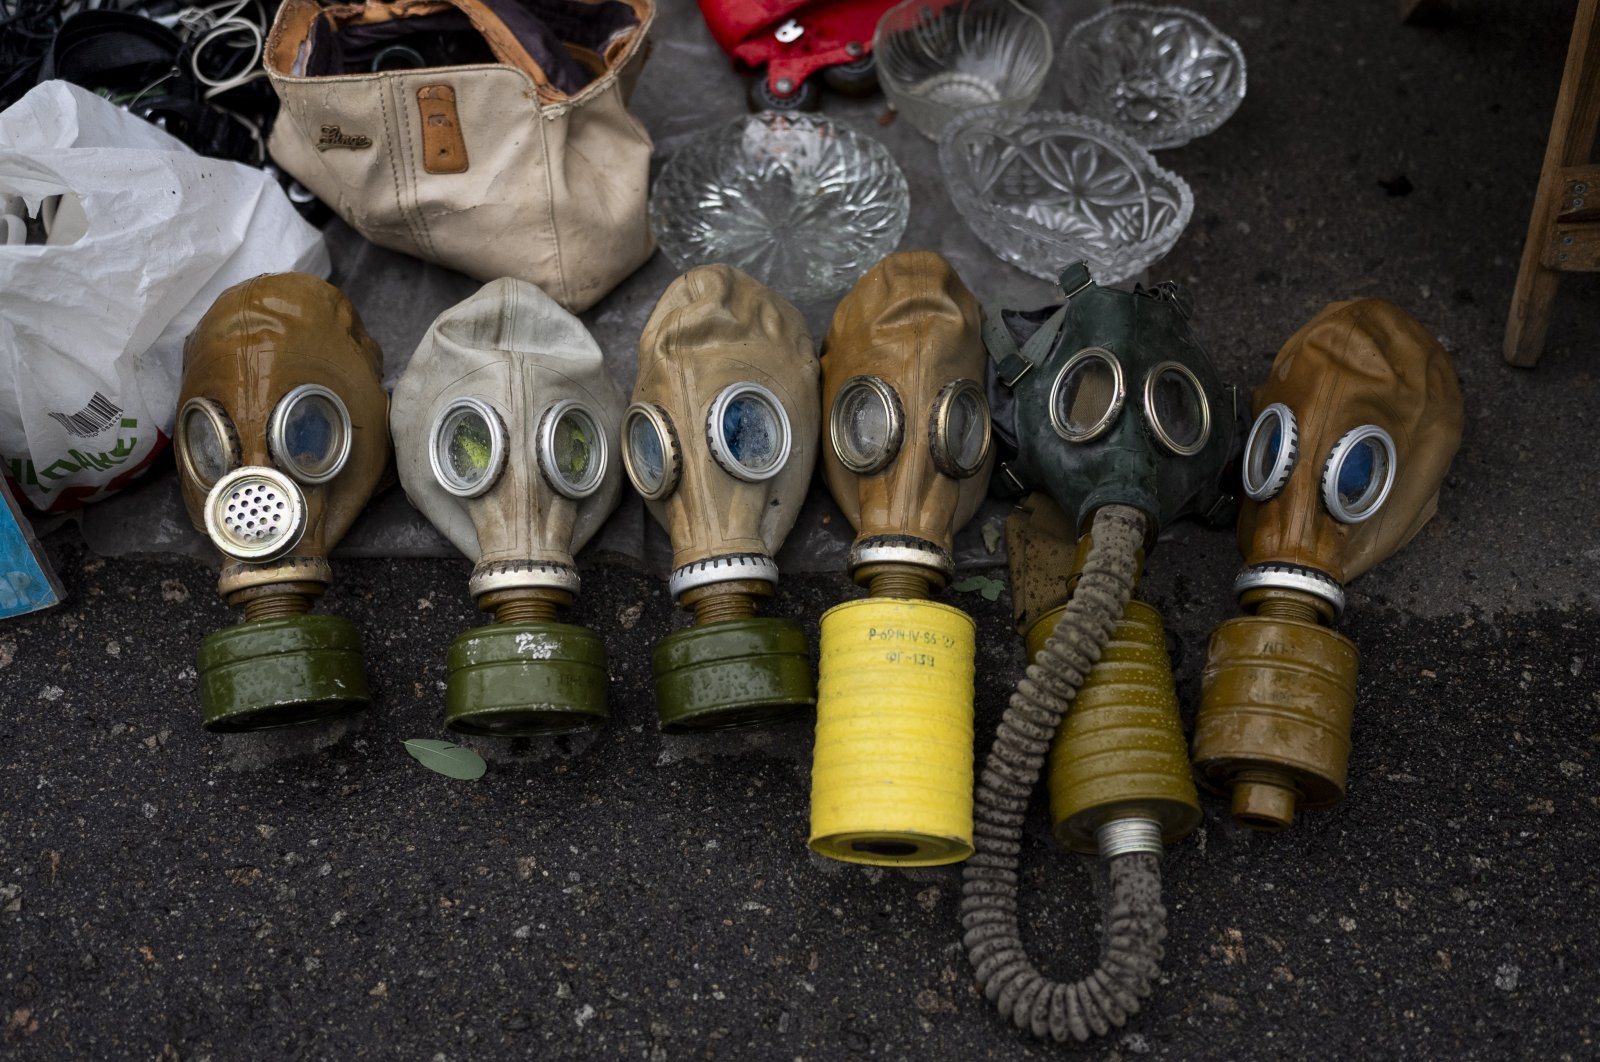 Moscow denies US allegations of chemical weapon use in Ukraine | Daily Sabah - Daily Sabah